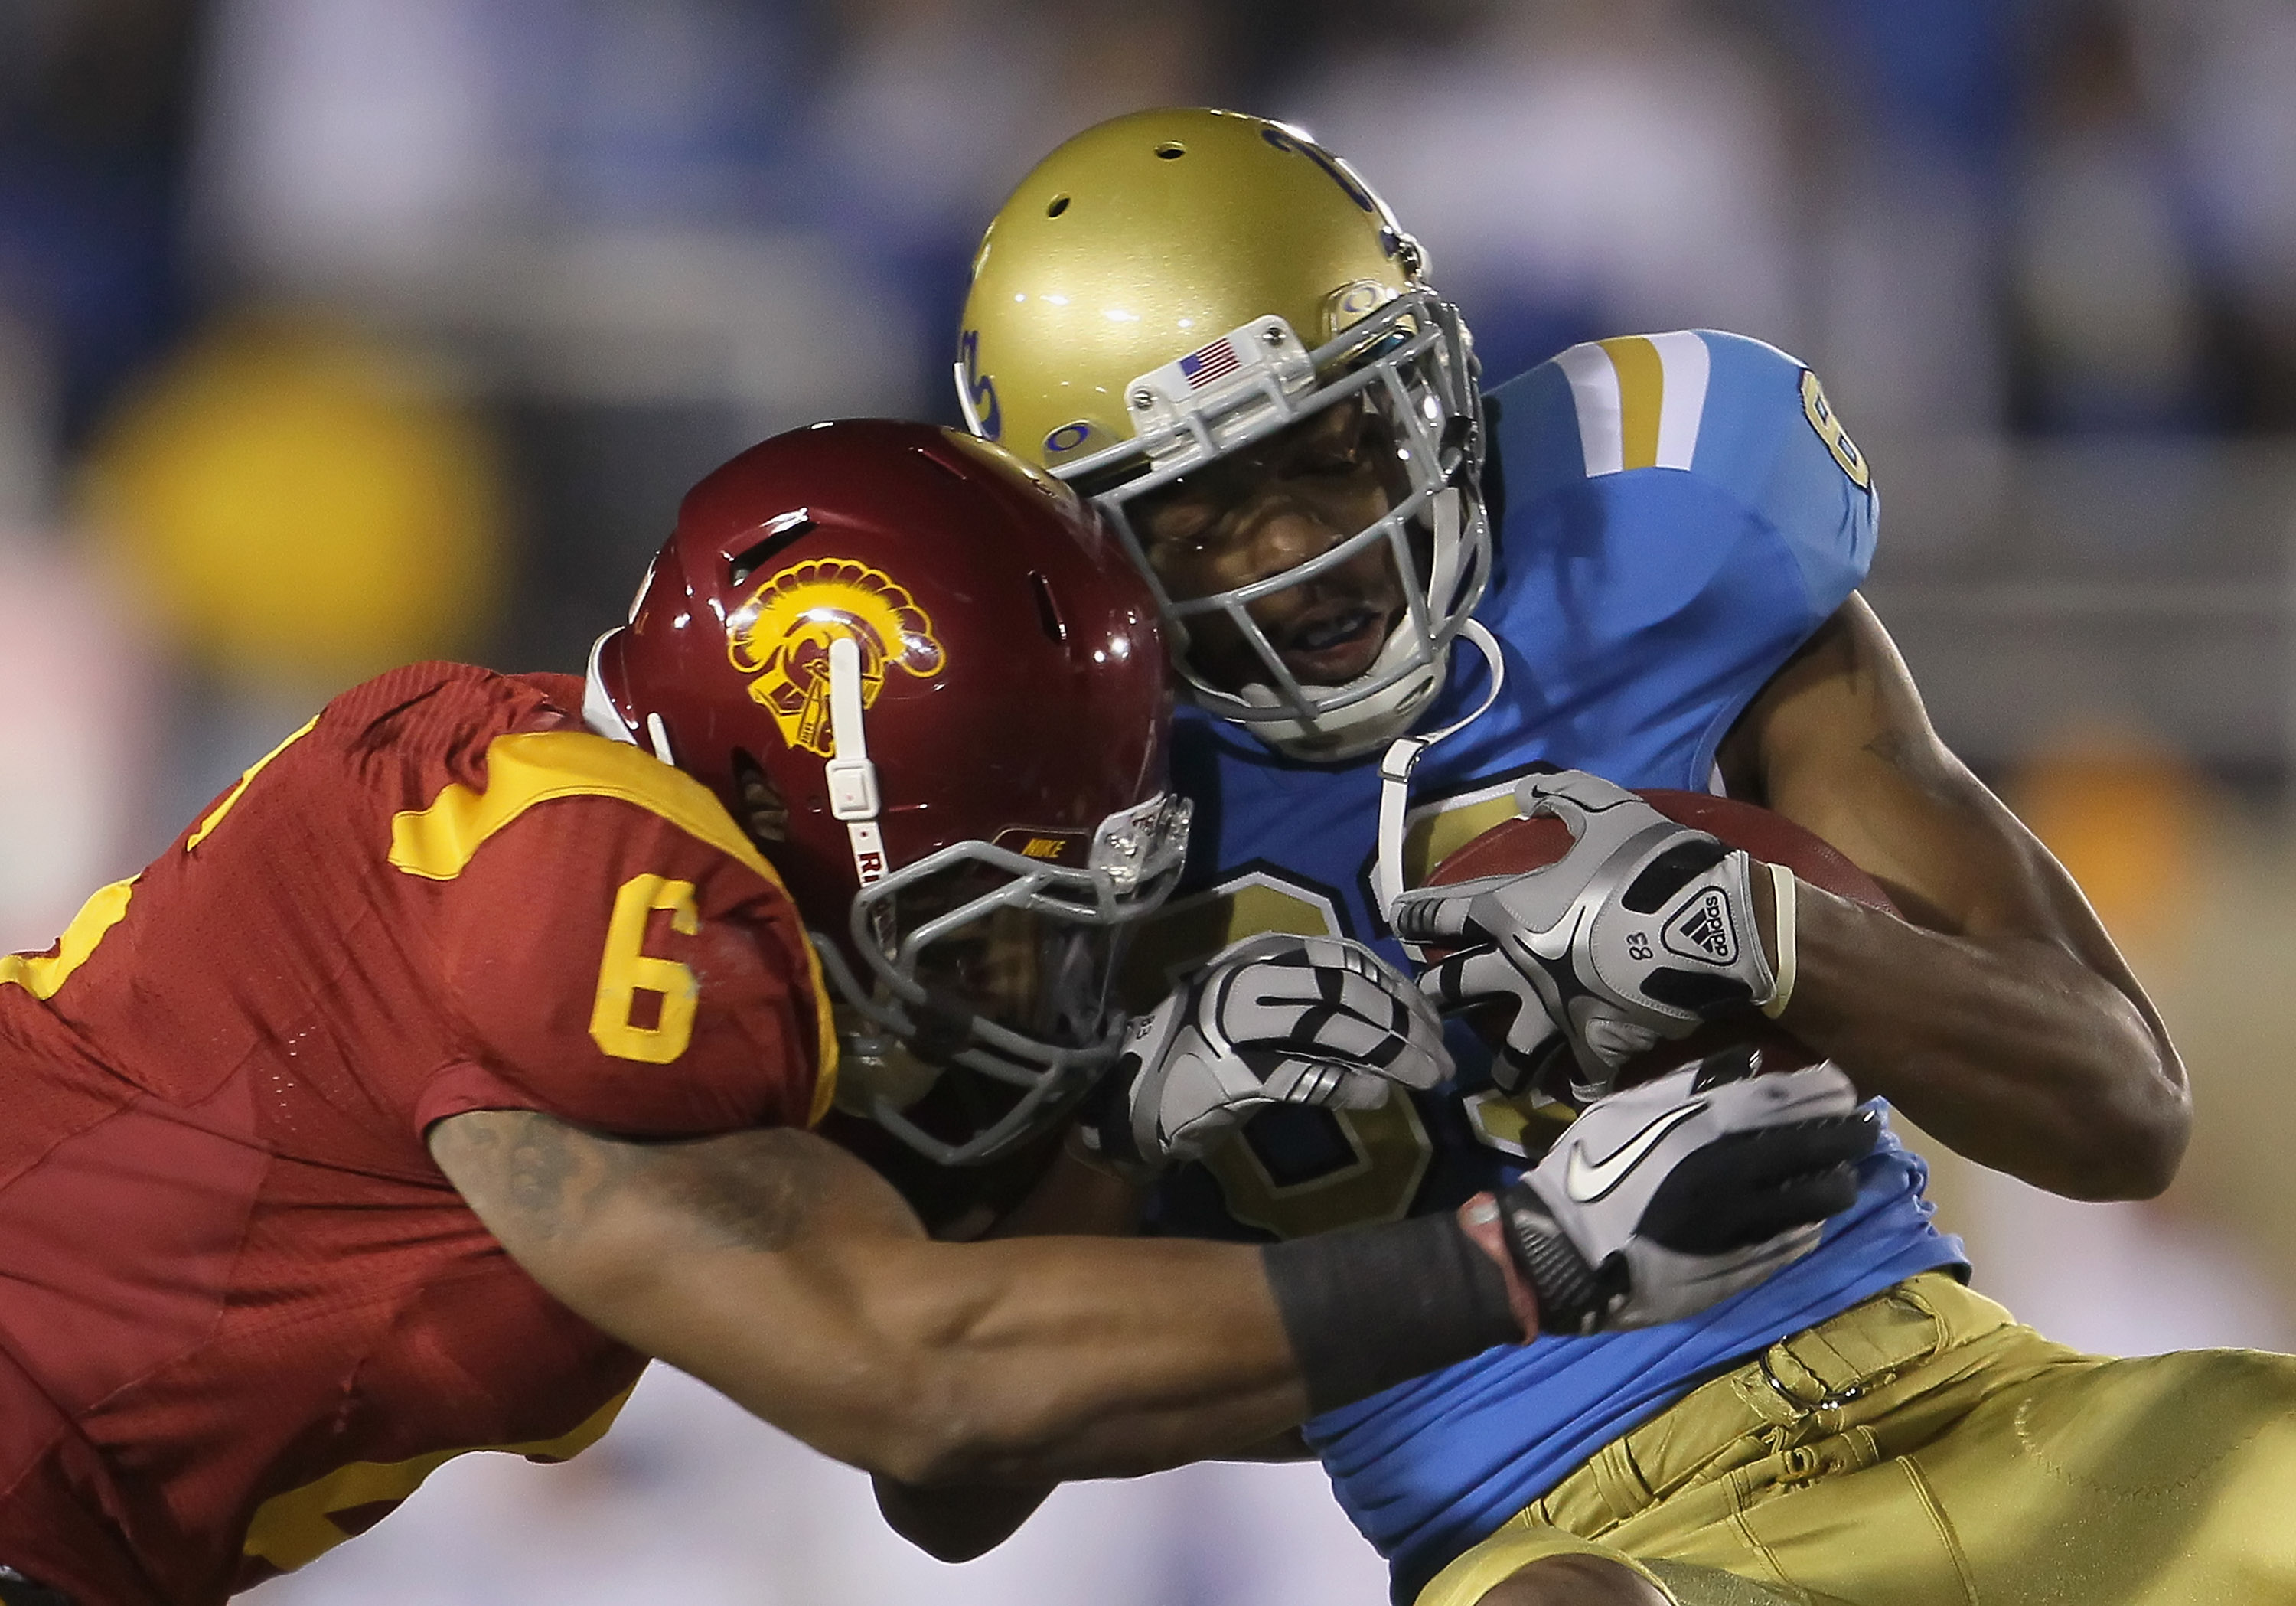 PASADENA, CA - DECEMBER 04:  Malcolm Smith #6 of the USC Trojans tackles Nelson Rosario #83 of the UCLA Bruins during the first half at the Rose Bowl on December 4, 2010 in Pasadena, California. USC defeated UCLA 28-14.  (Photo by Jeff Gross/Getty Images)